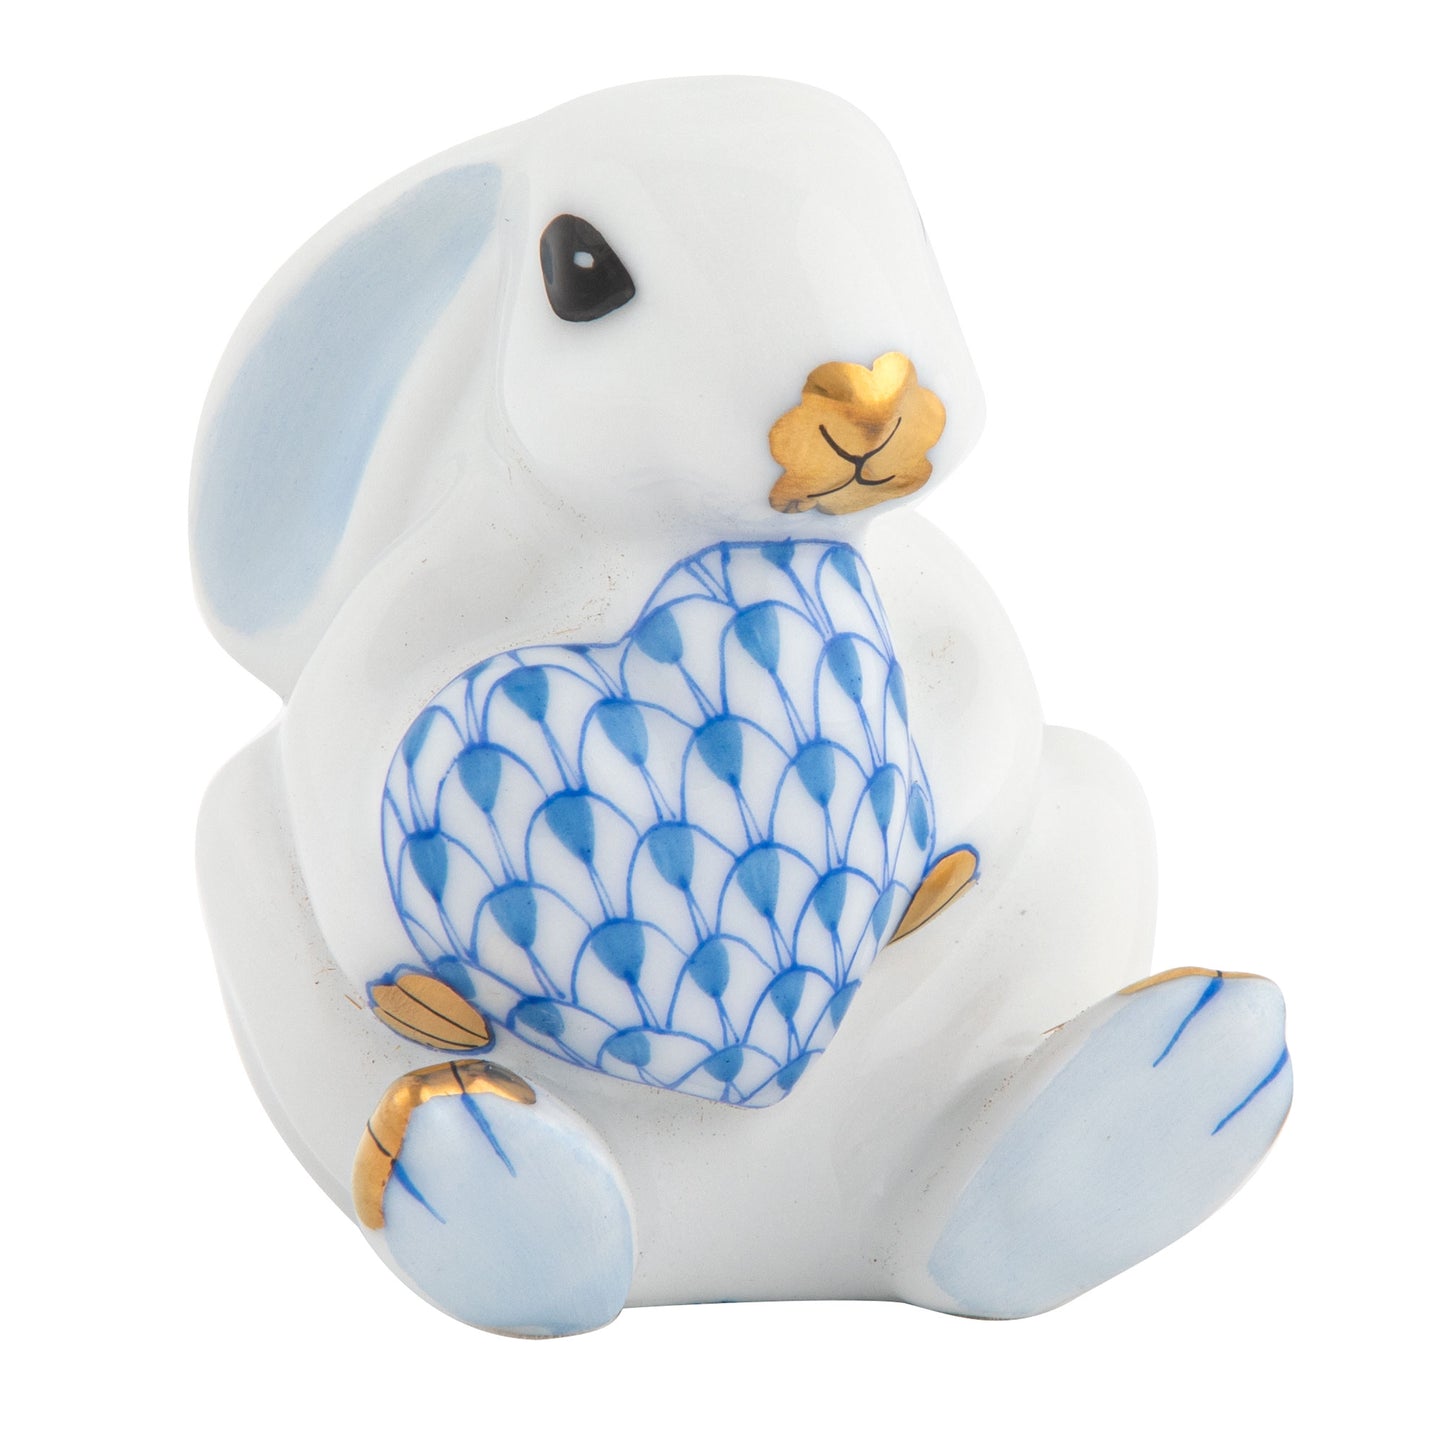 Herend Bunny with Heart